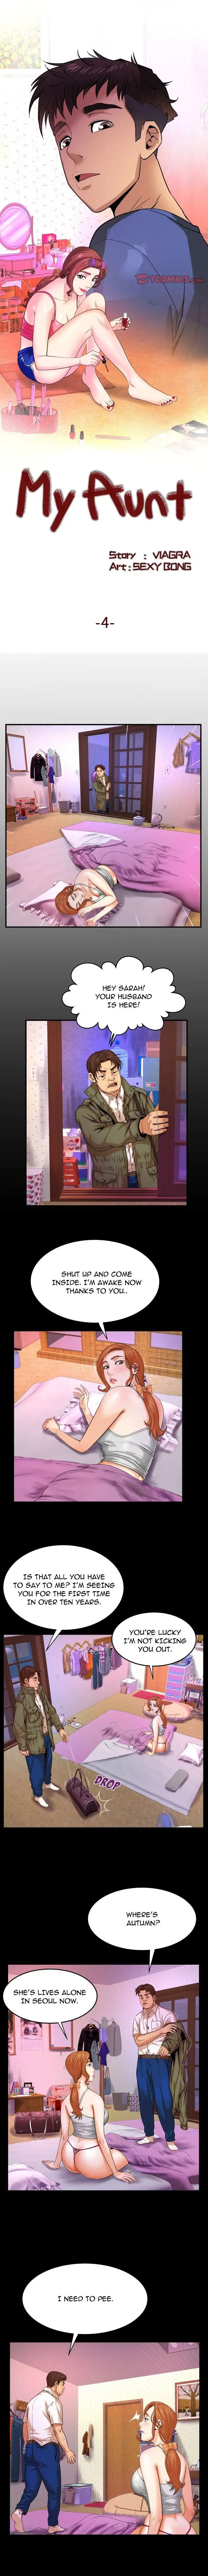 My Aunt - Chapter 4 Page 1